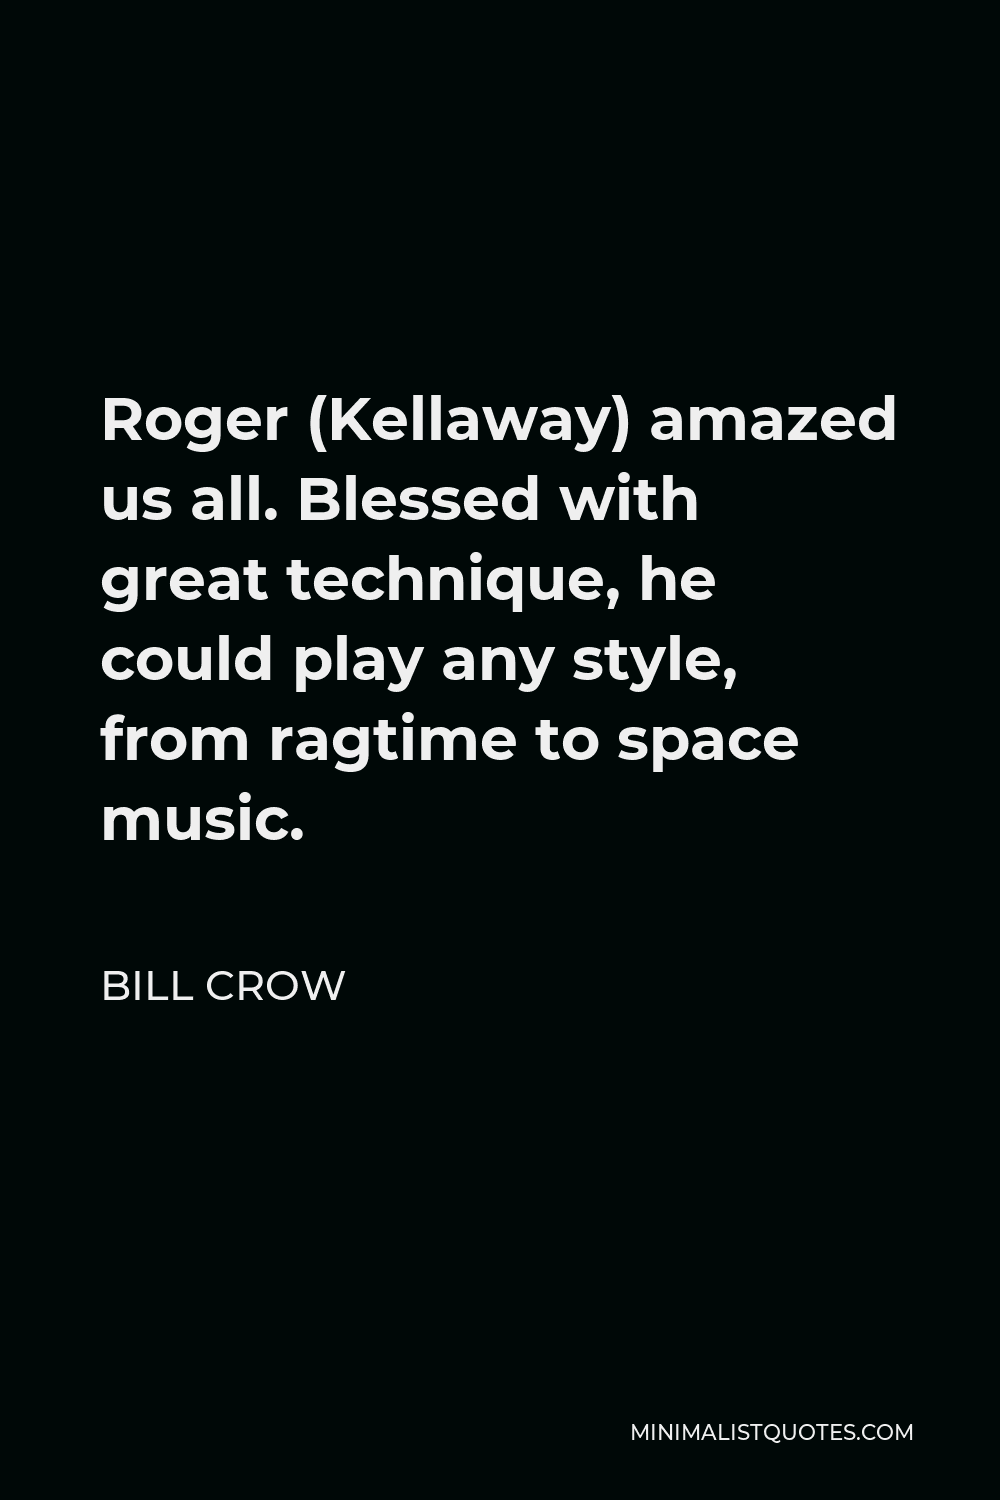 Bill Crow Quote - Roger (Kellaway) amazed us all. Blessed with great technique, he could play any style, from ragtime to space music.